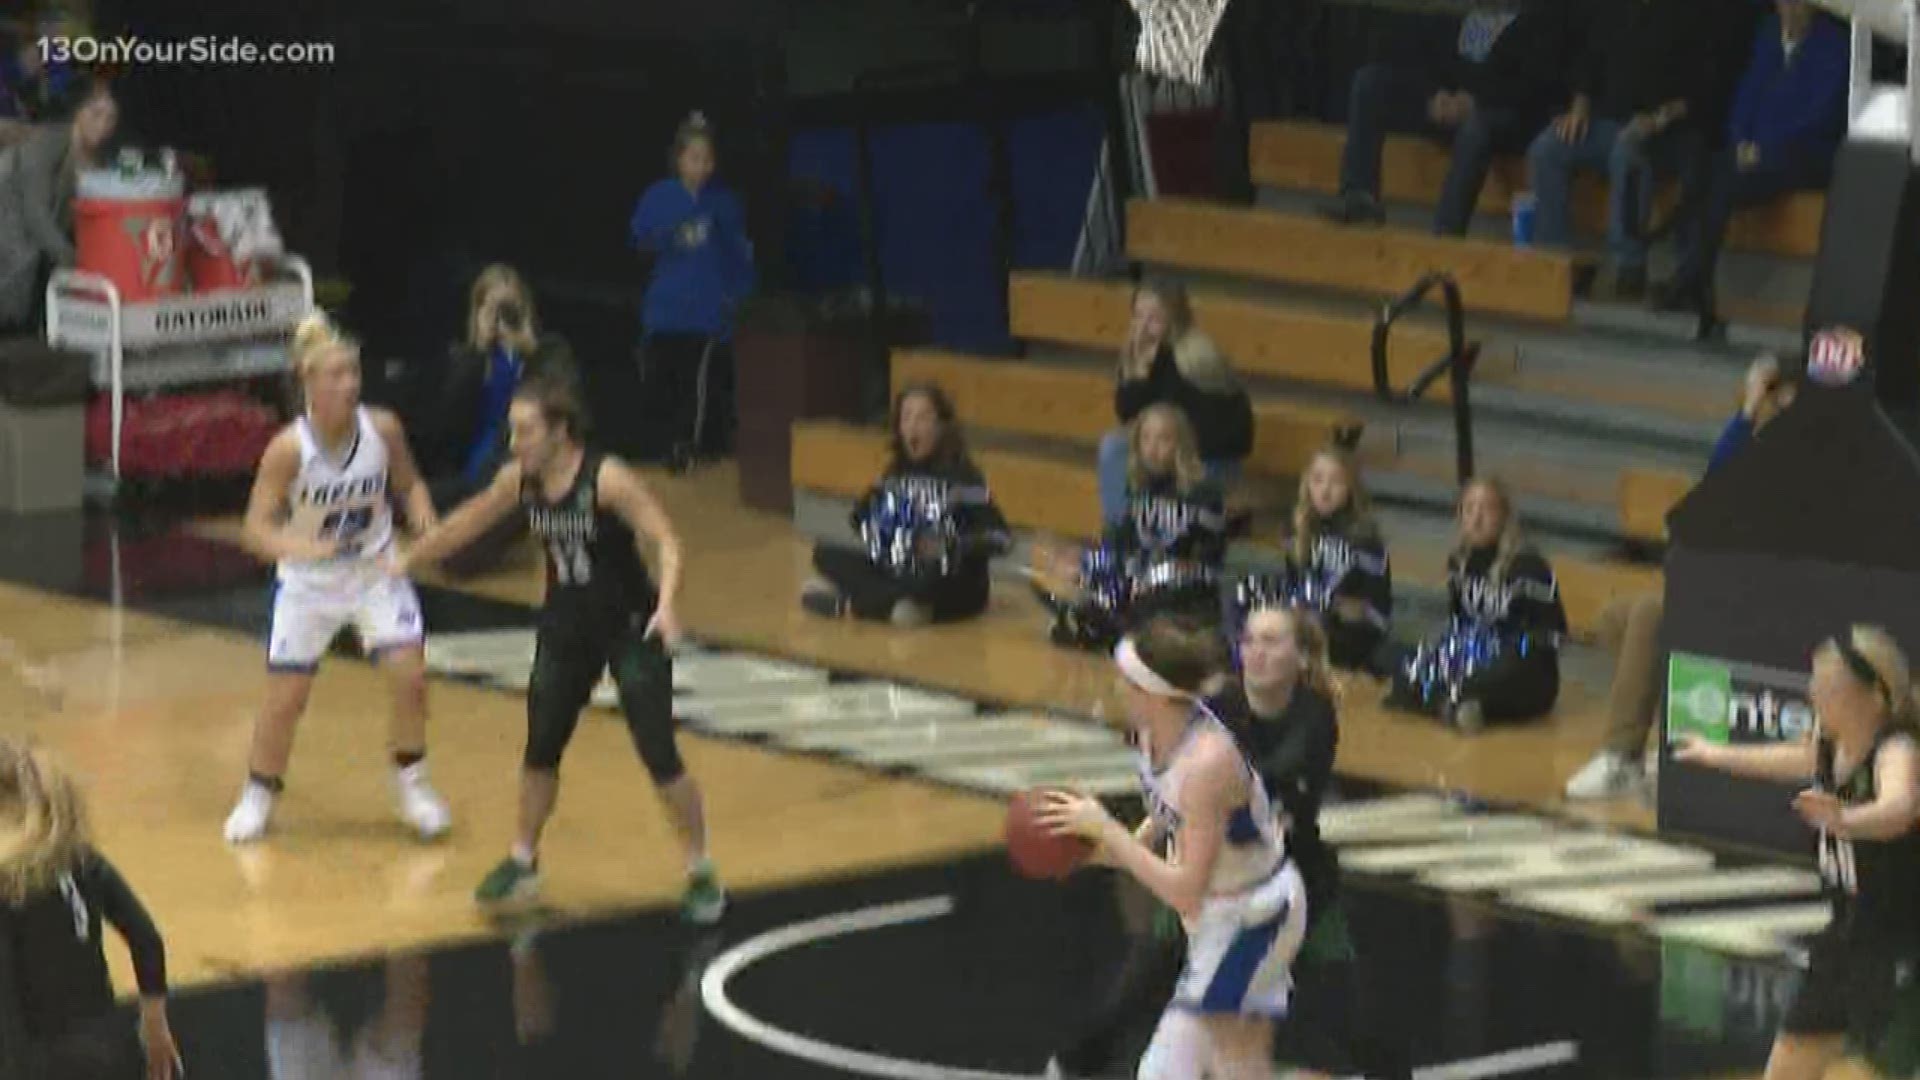 The Laker women's basketball team looked to stay perfect Thursday night against Parkside.